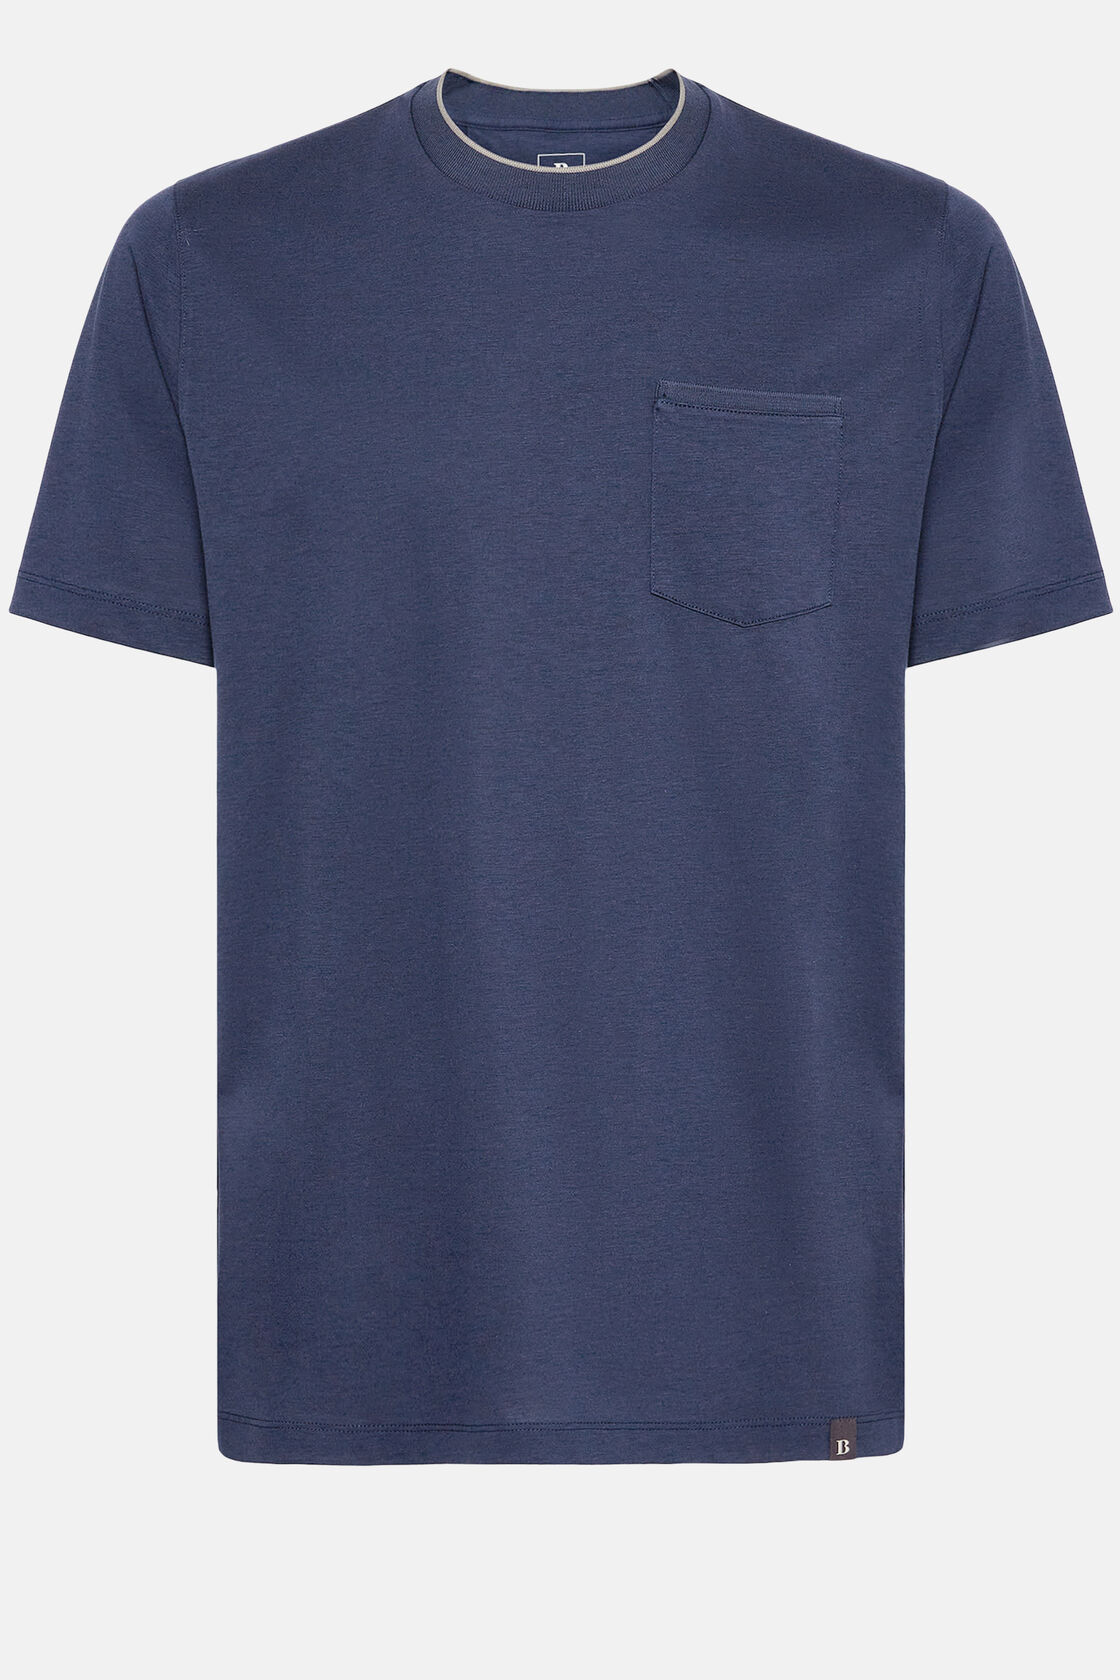 T-Shirt in Cotton and Tencel Jersey, Navy blue, hi-res